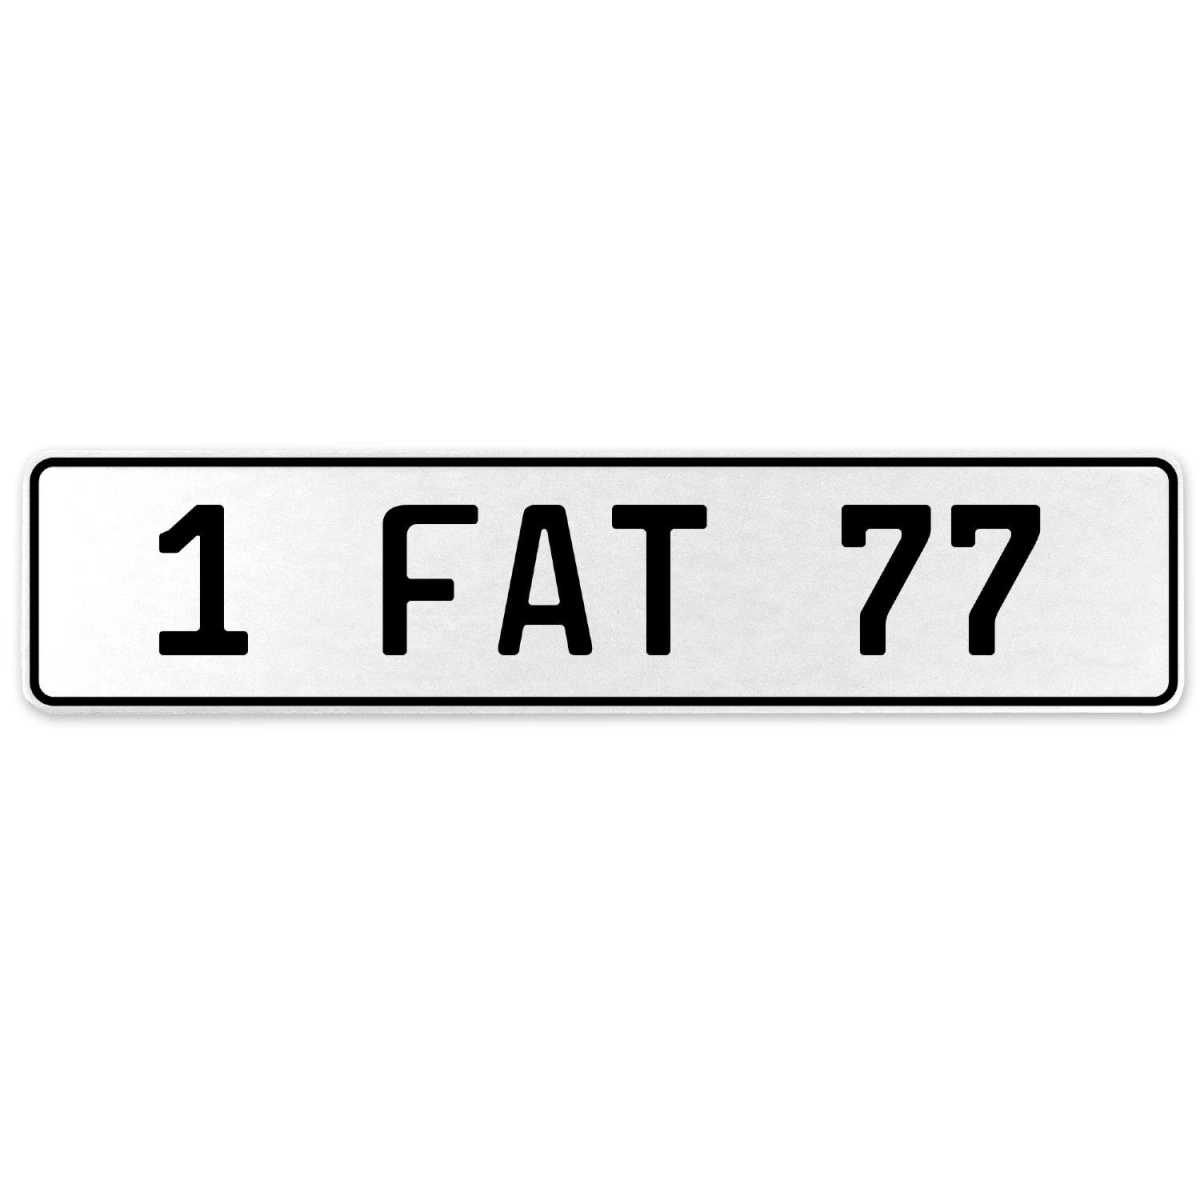 554674 1 Fat 77 - White Aluminum Street Sign Mancave Euro Plate Name Door Sign Wall